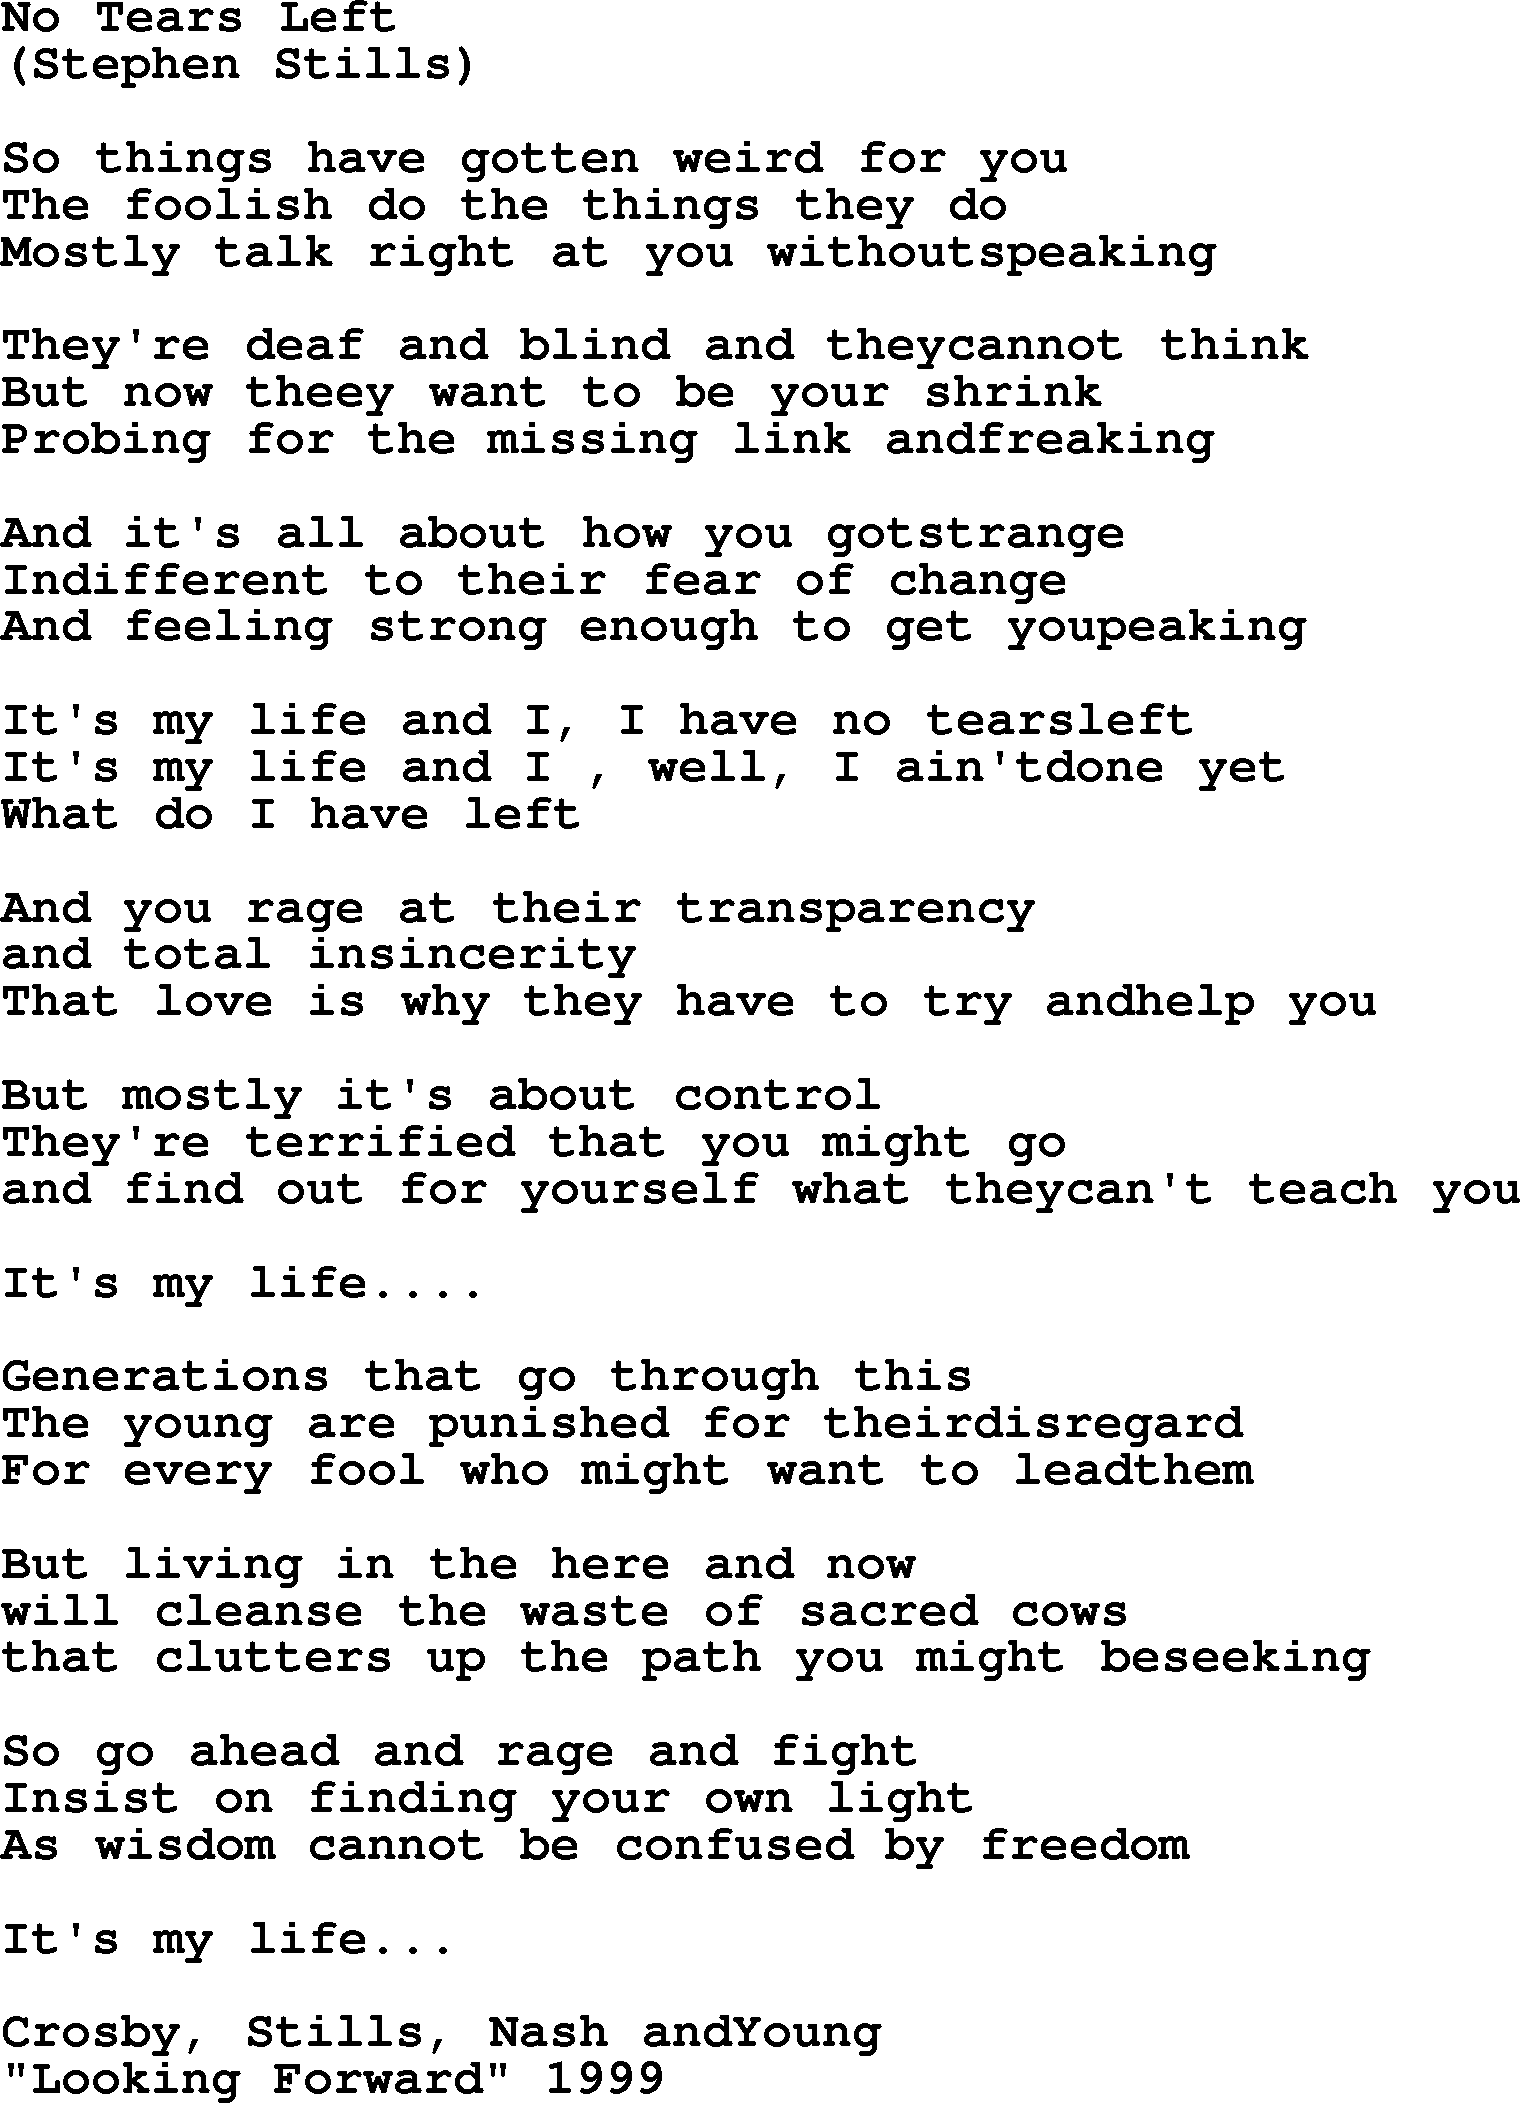 No Left, by The Byrds lyrics with pdf